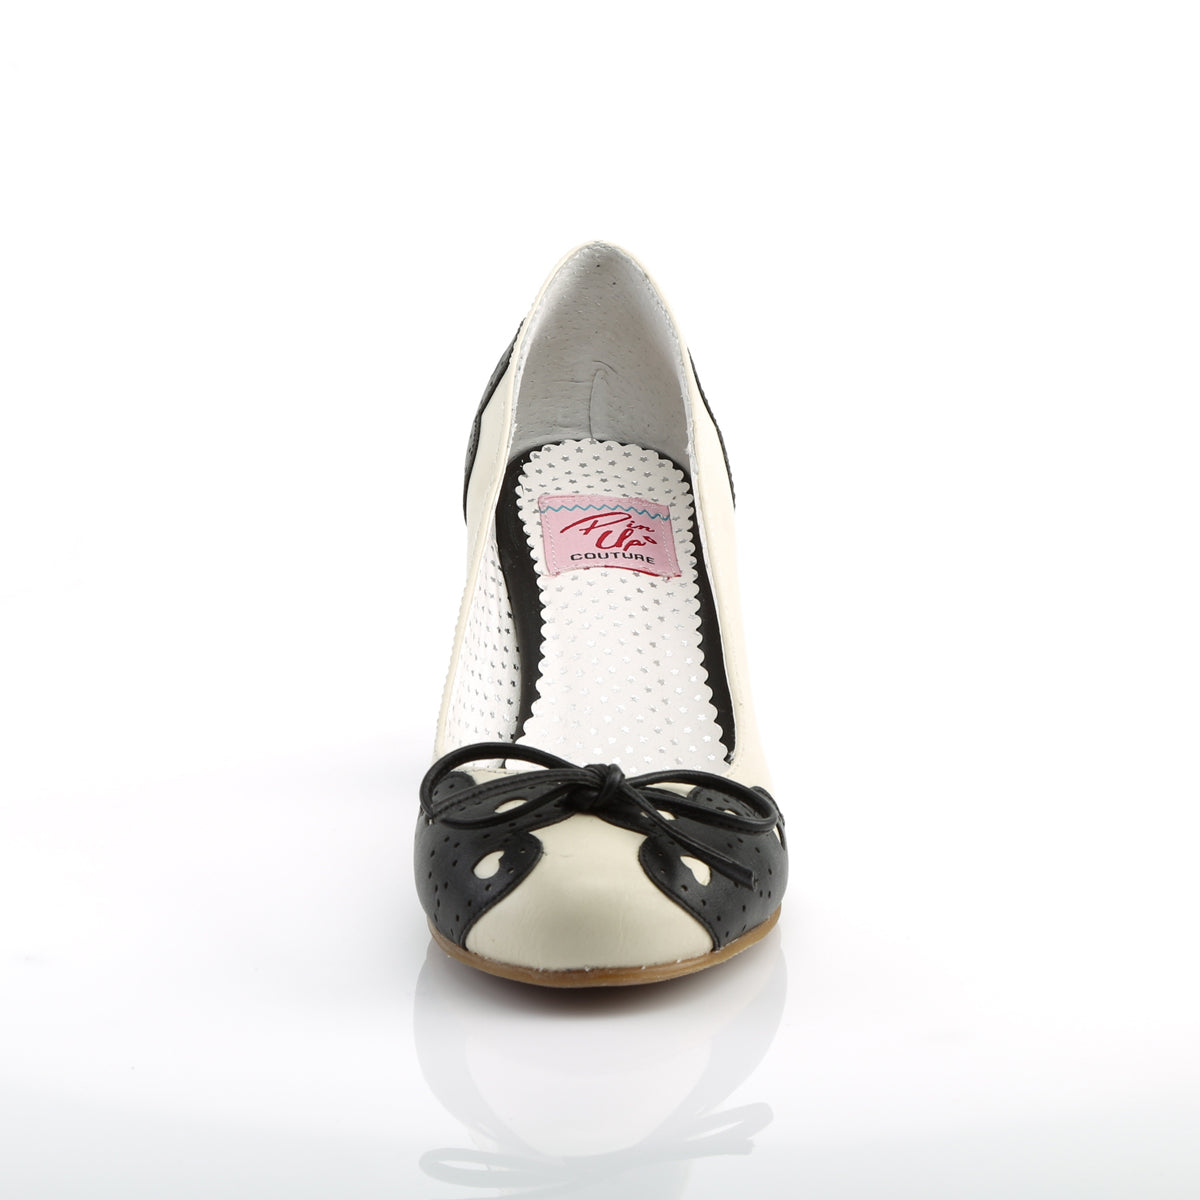 WIGGLE-17 Pin Up Couture Black-Cream Faux Leather Single Soles [Retro Glamour Shoes]